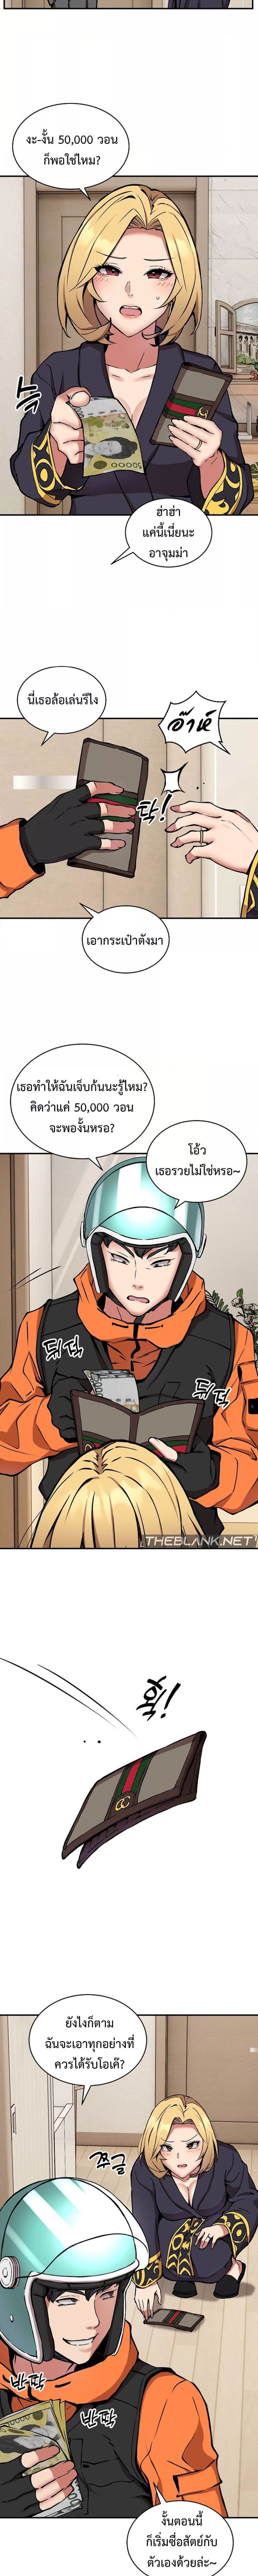 Driver in the New City ตอนที่ 11 ภาพ 8